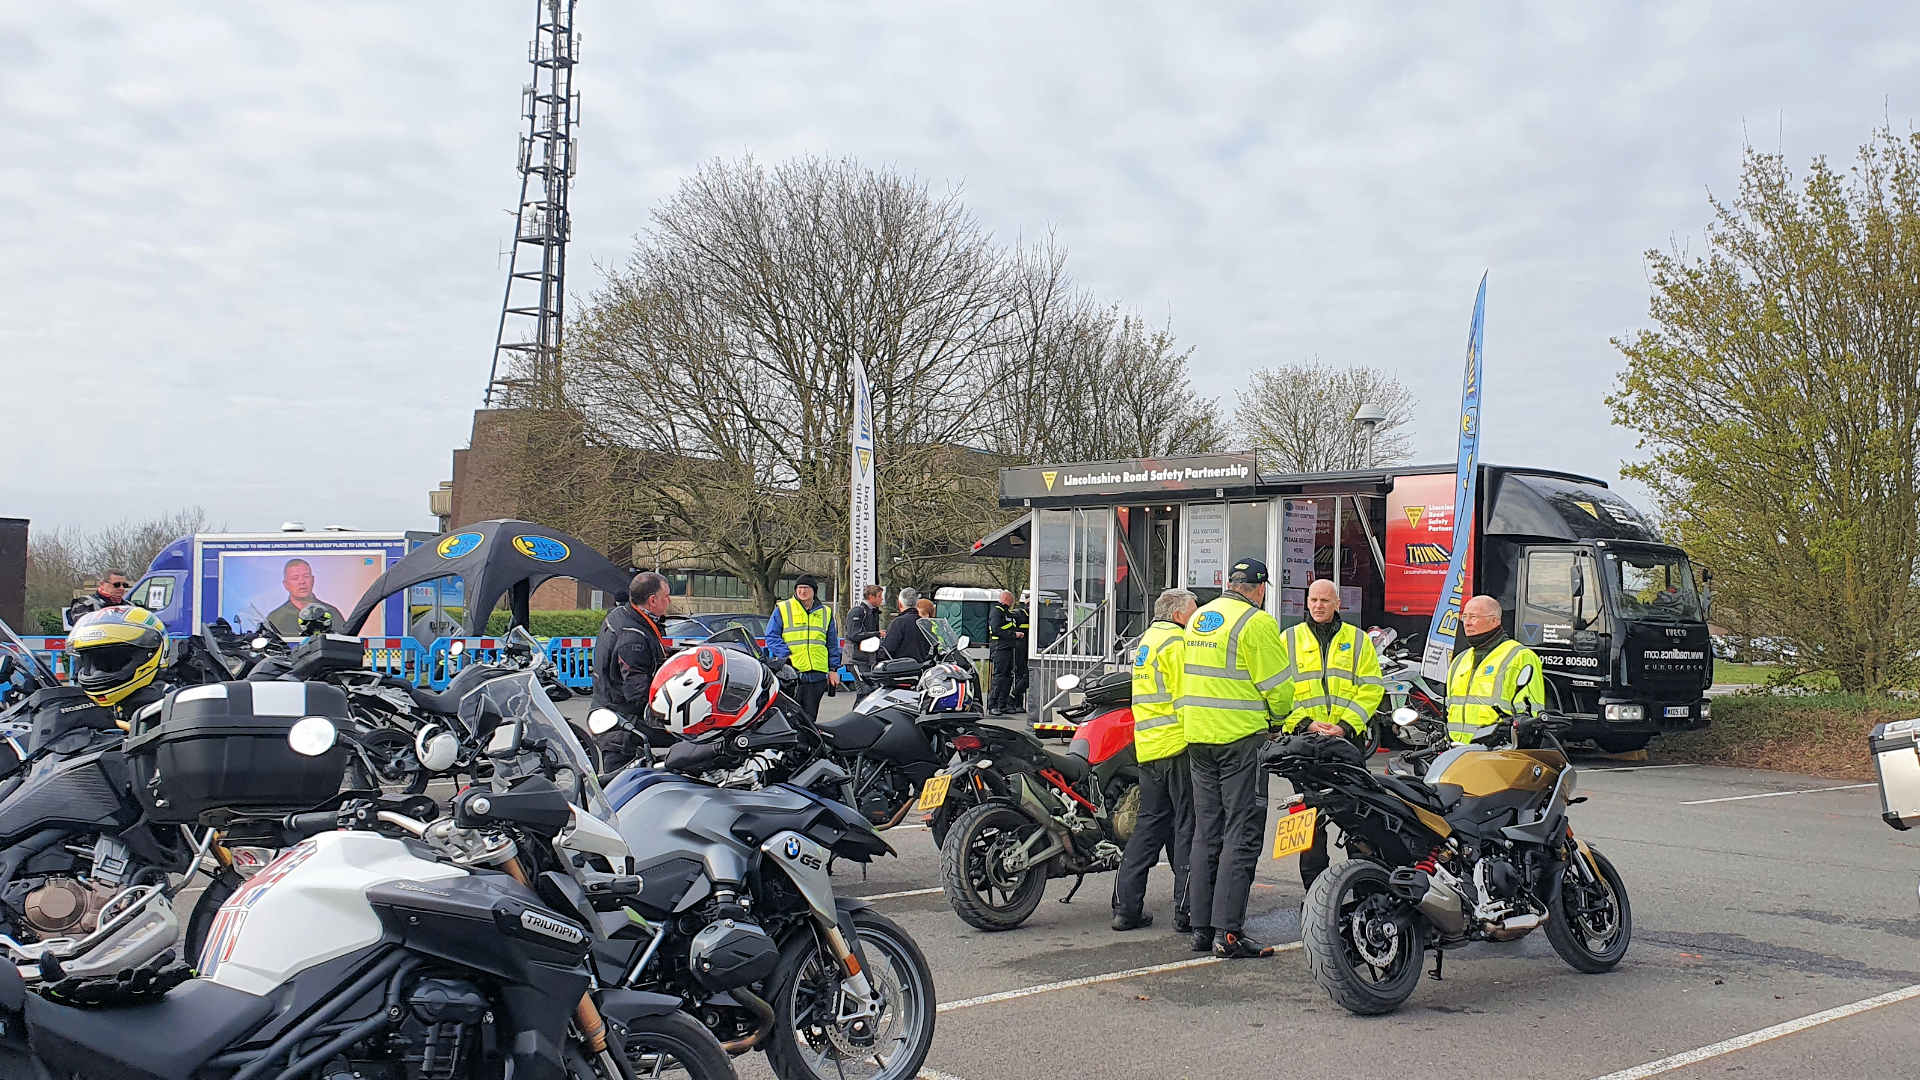 Lincolnshire bikers attend all-day biker breakfast with Lincolnshire Police 2022